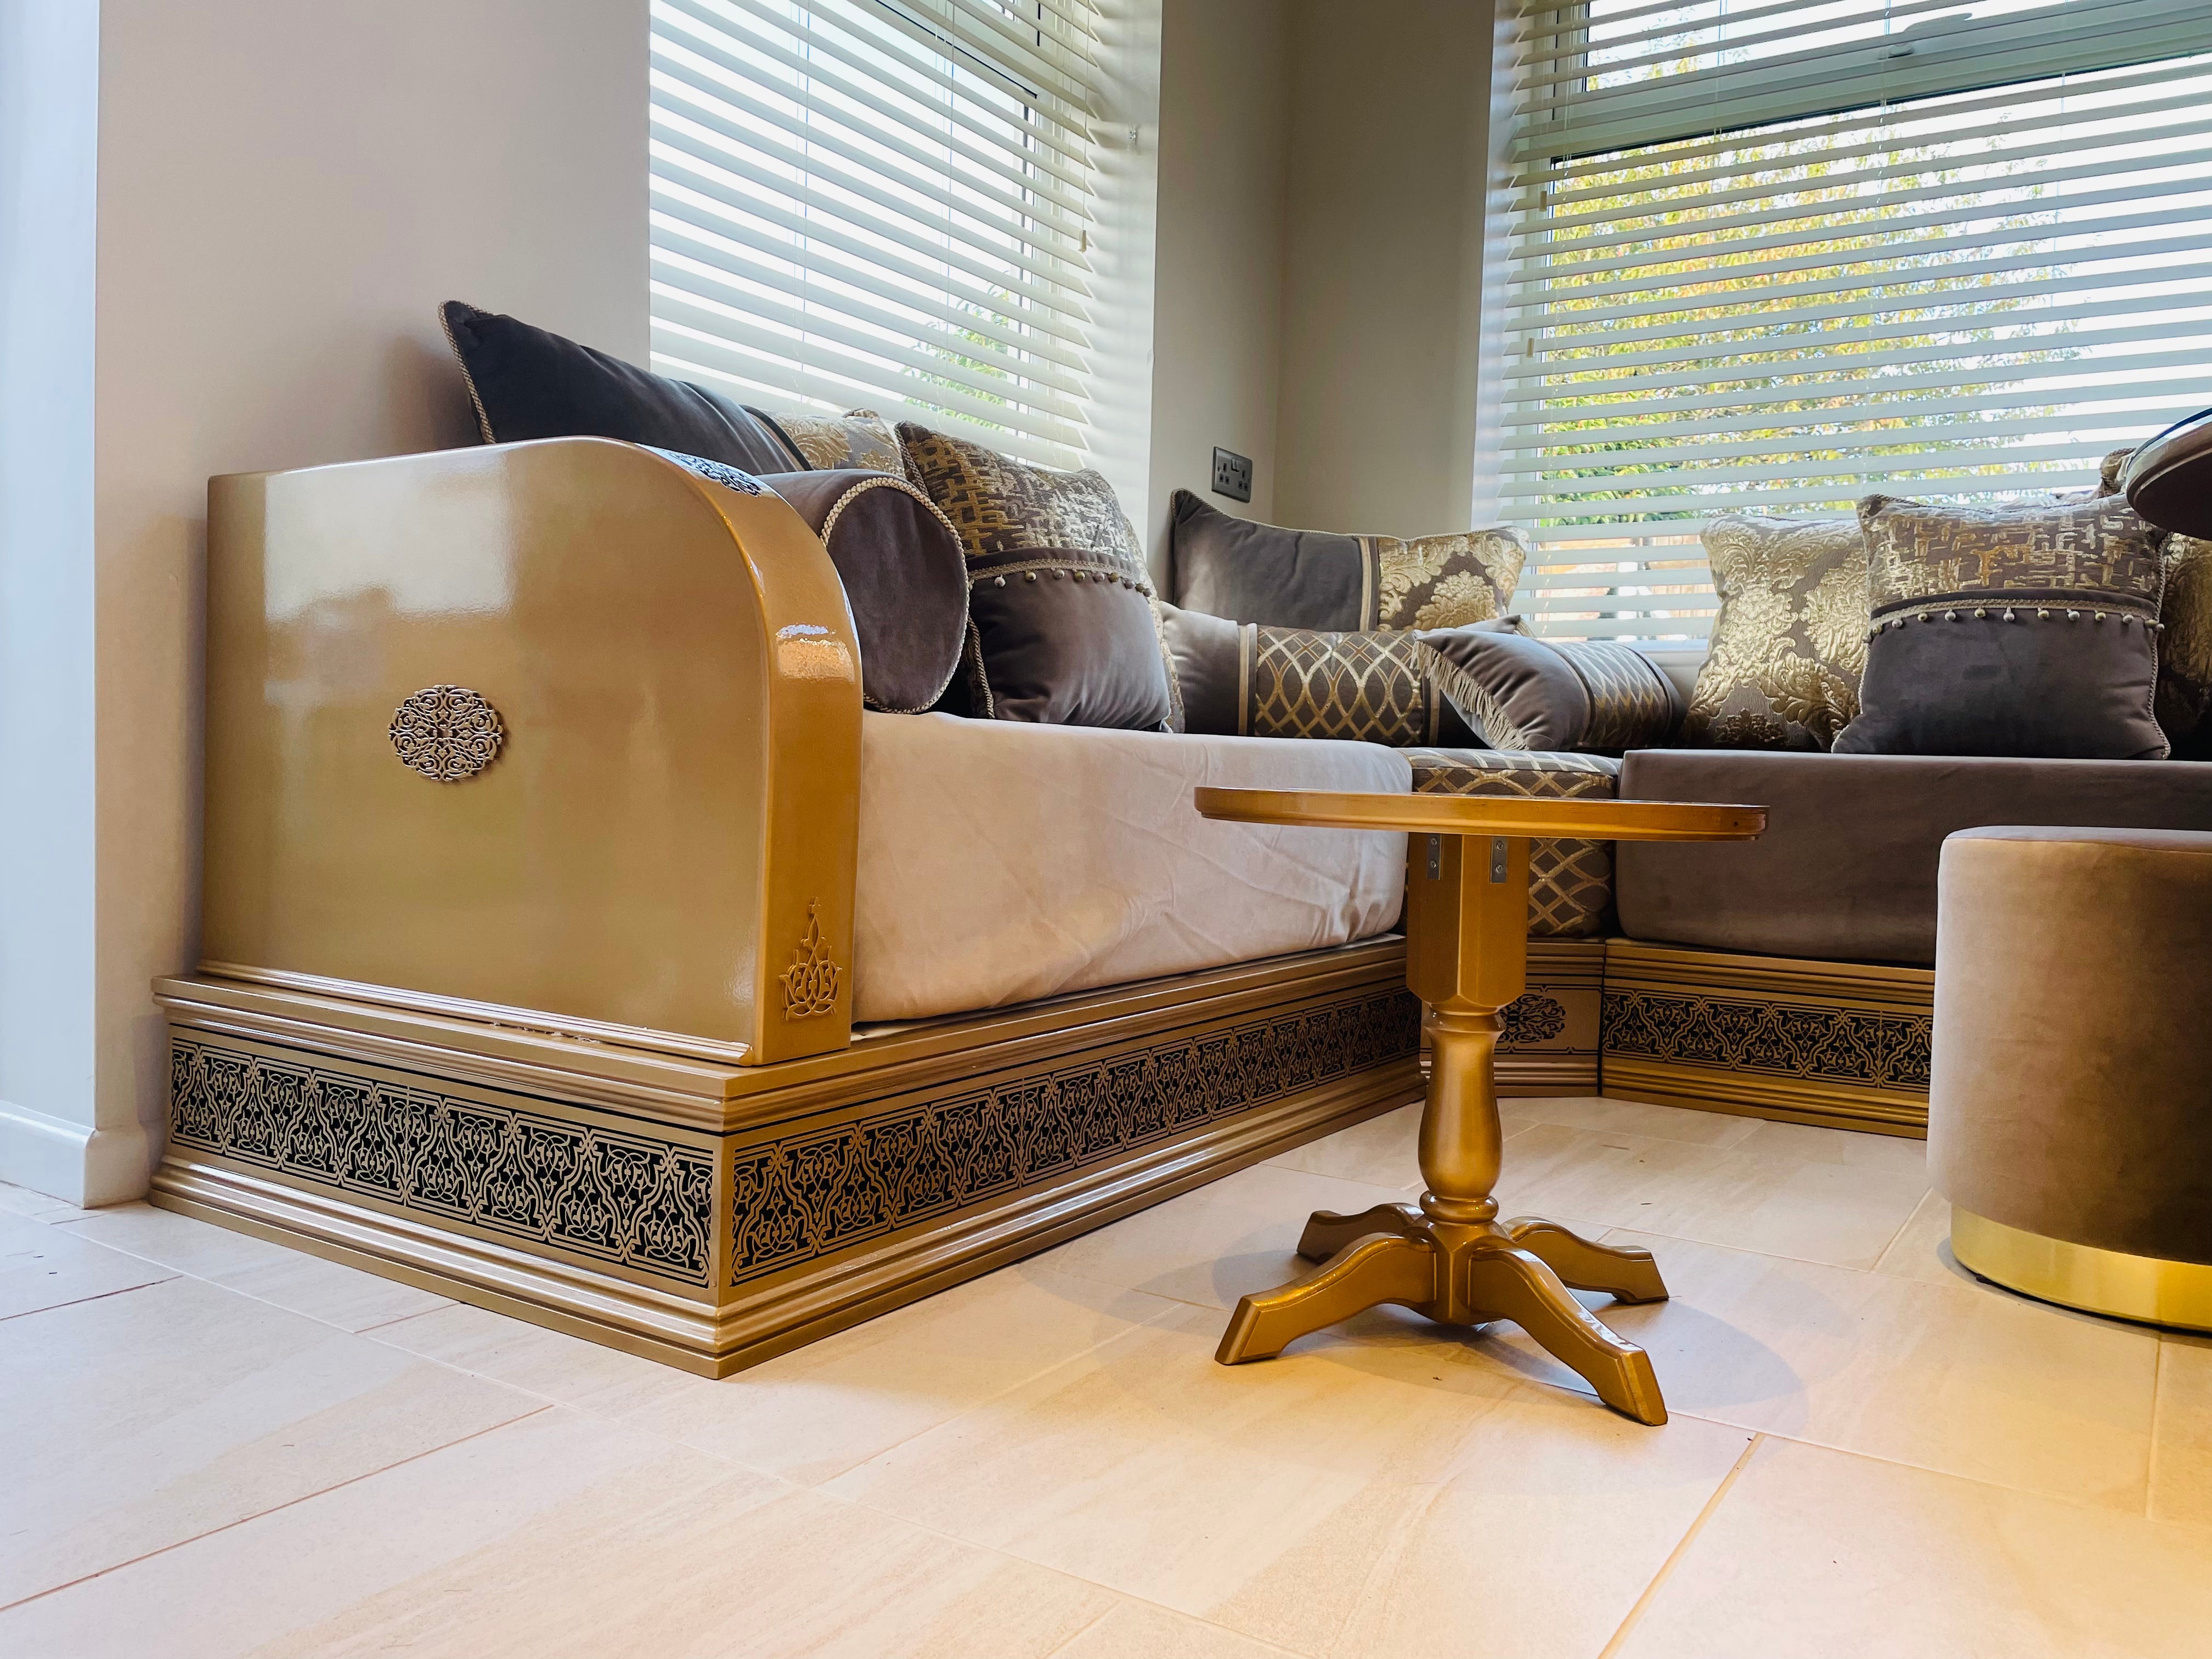 Luxurious Arabesque Moroccan Custom Sofas | Daybed Made to Measure In UK